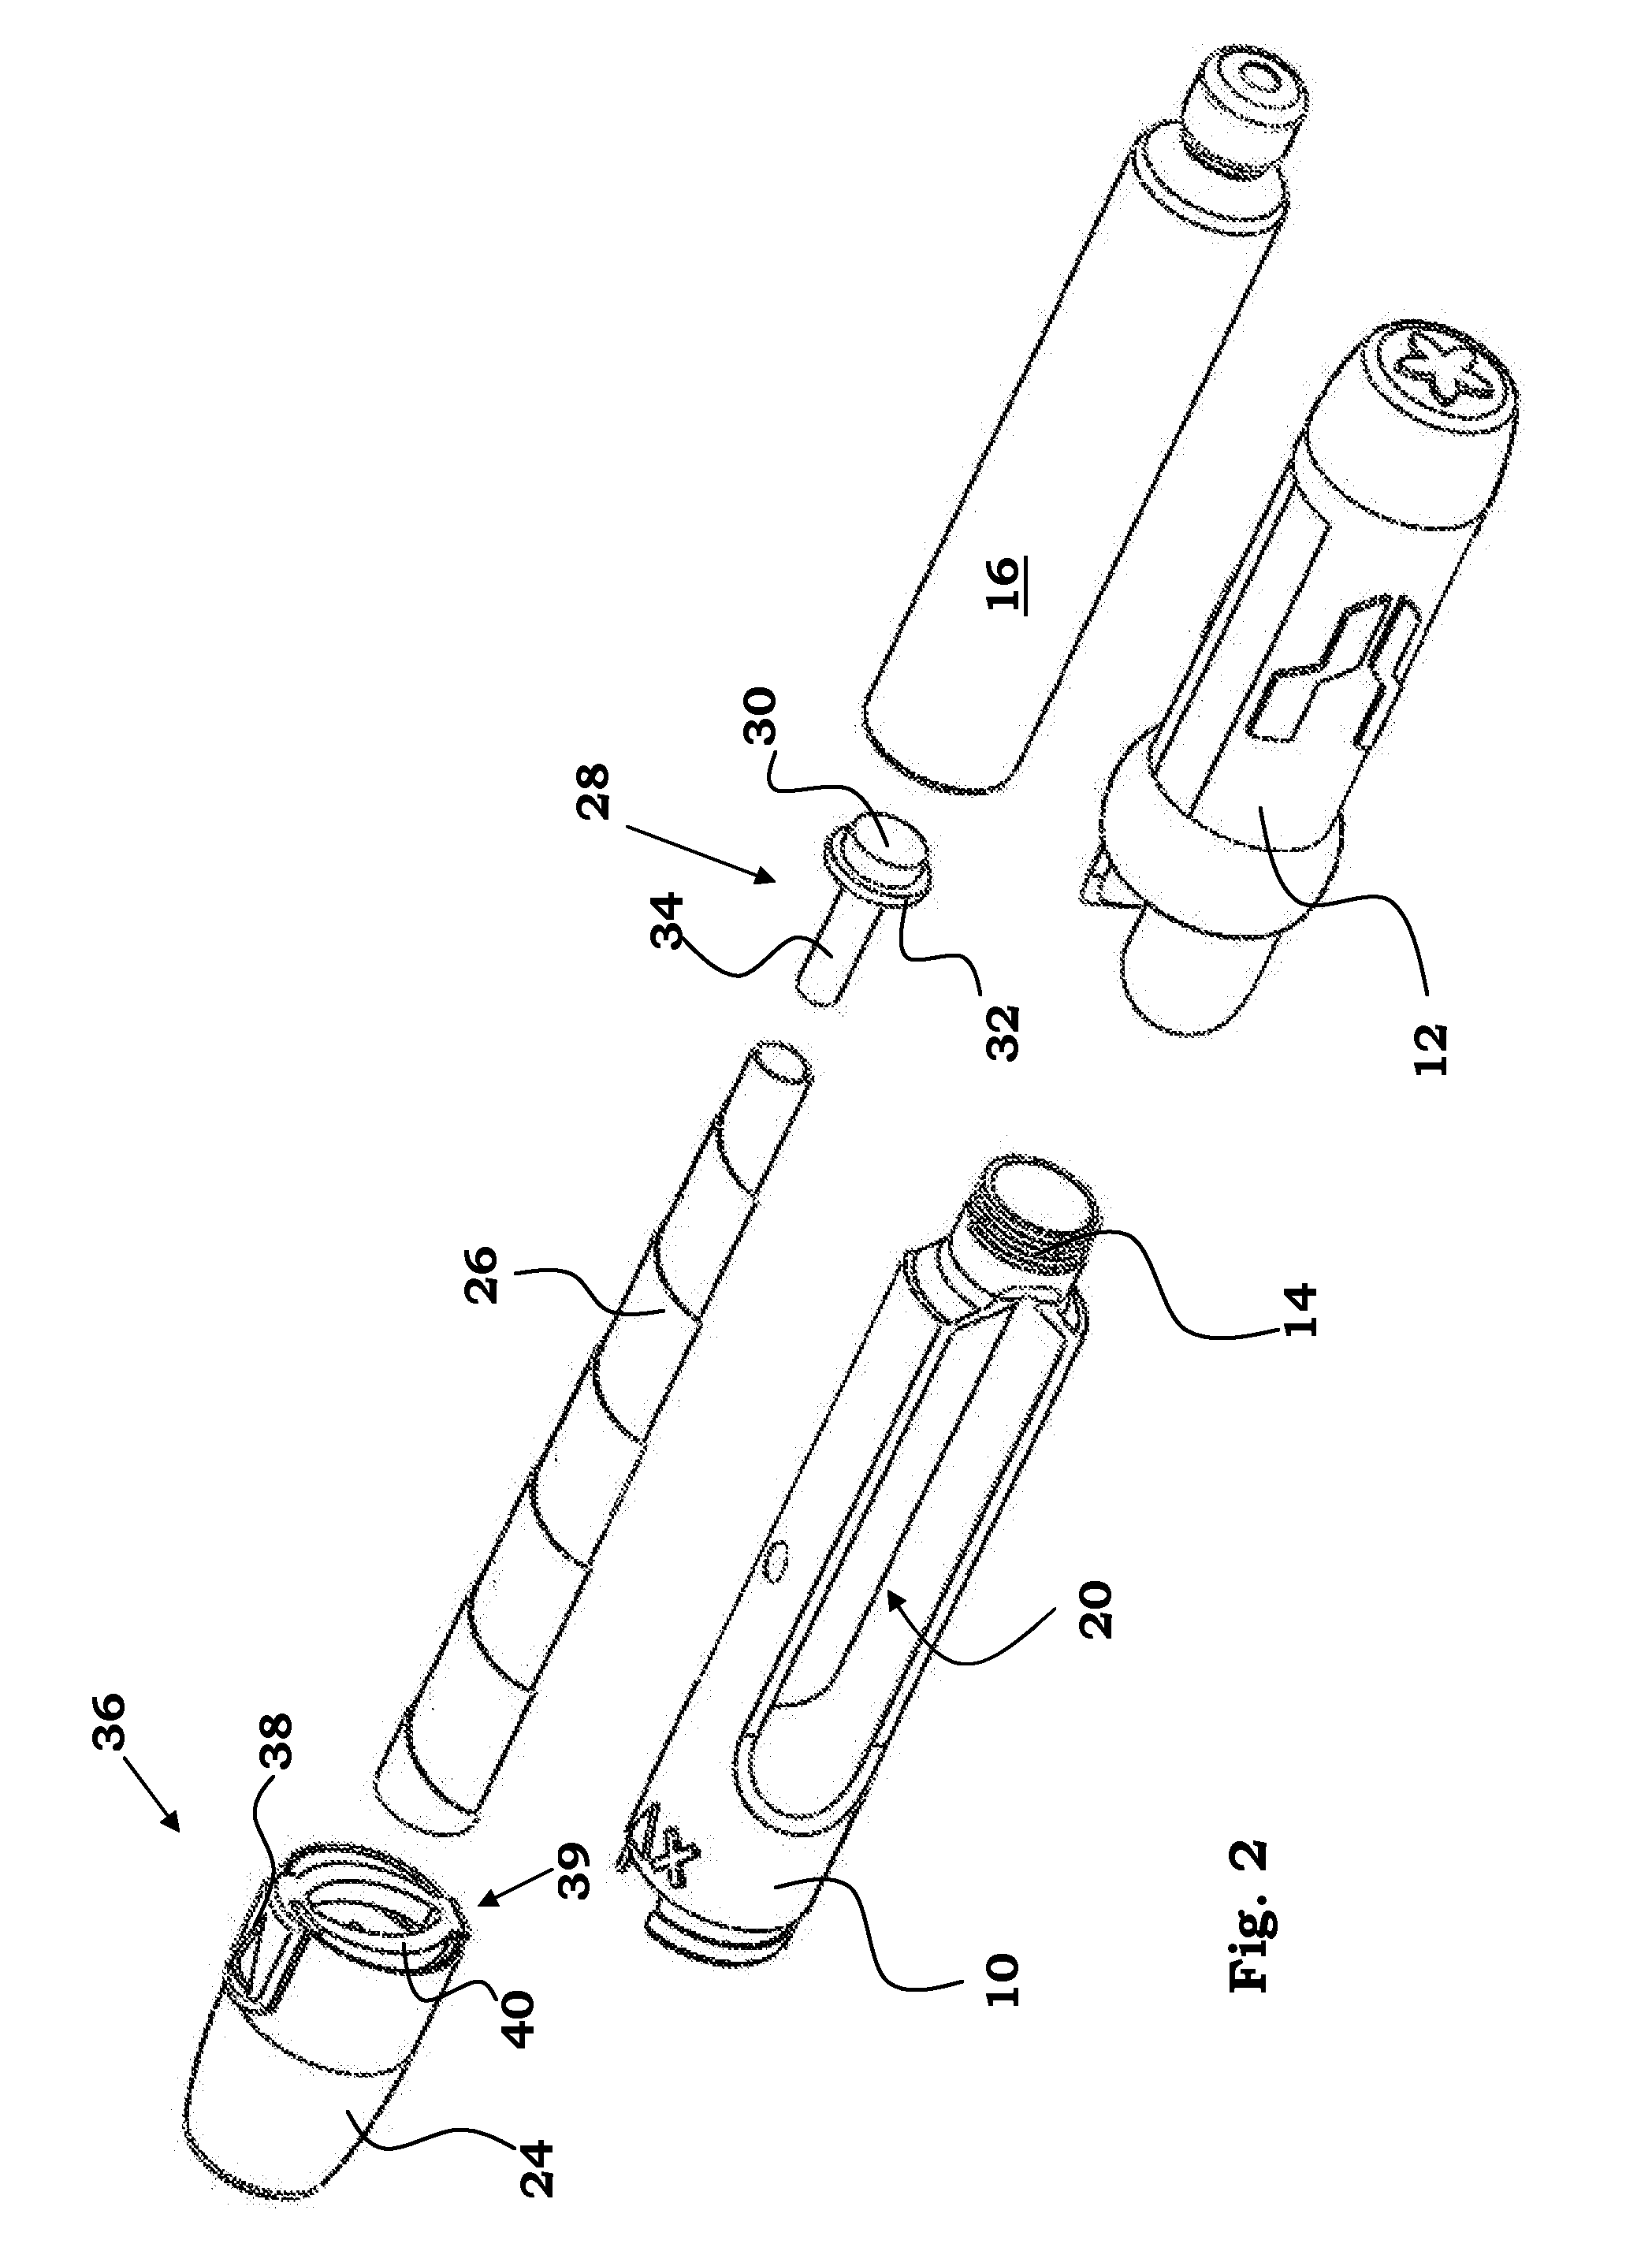 Medicament Delivery Device Powered by Volute Spring